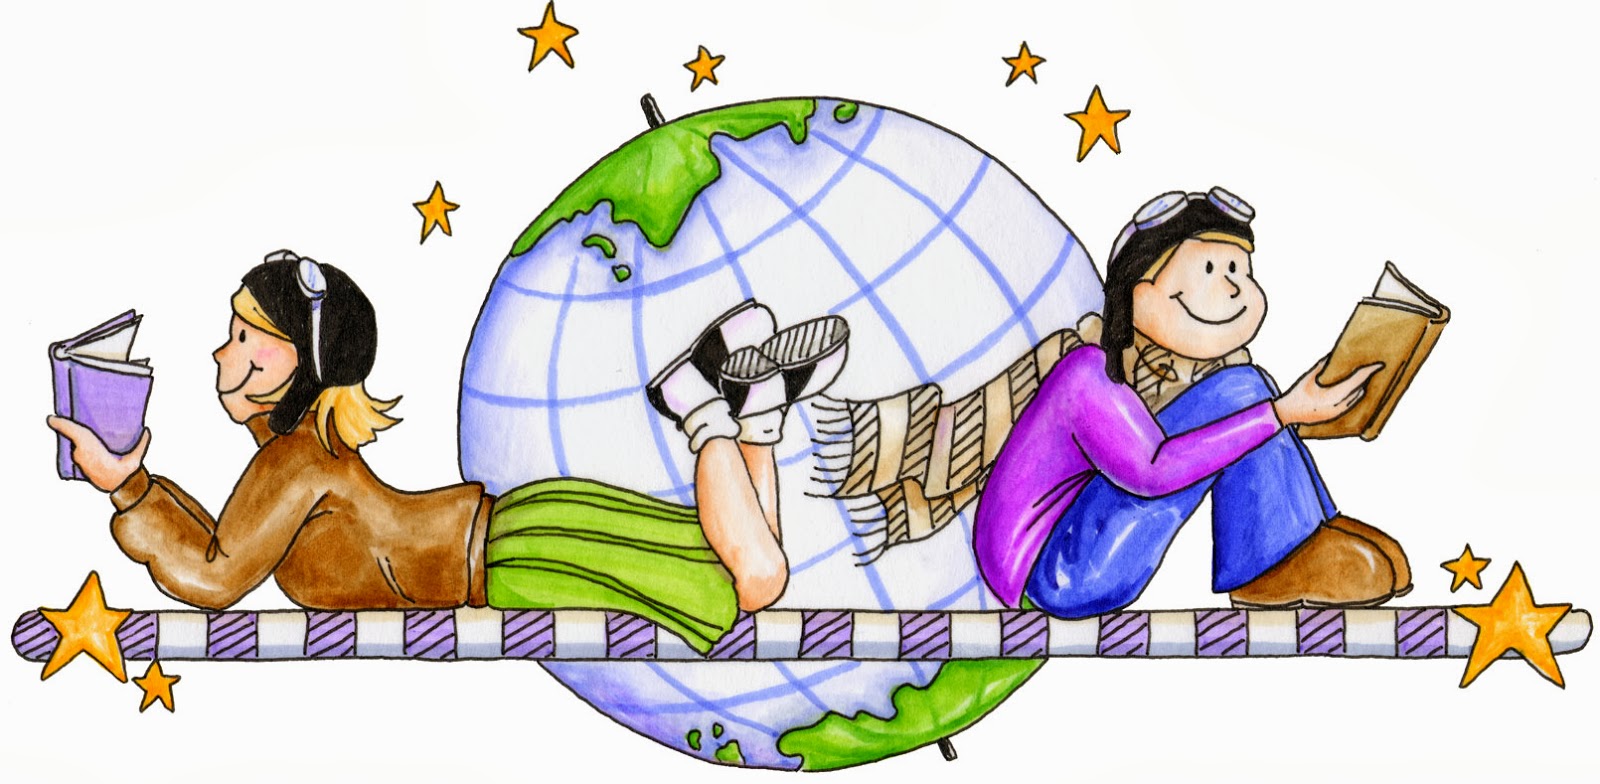 Free images of geography. Clipart world geo